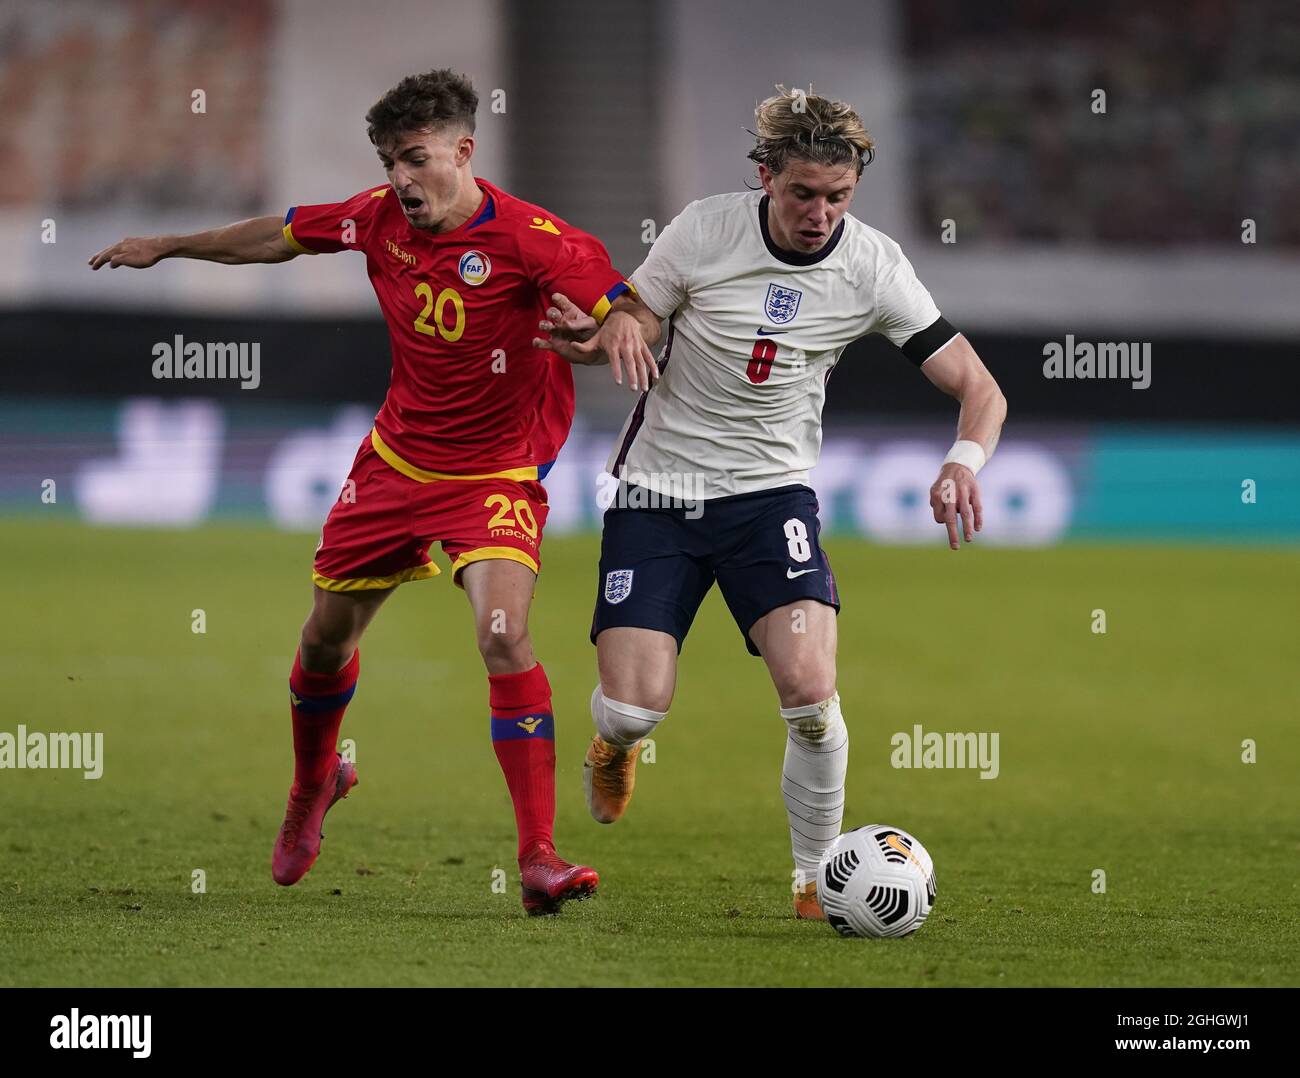 Izan Fernandez of Andorra tackled by Conor Gallagher of England during the UEFA Euro U21 Qualifying match at Molineux, Wolverhampton. Picture date: 13th November 2020. Picture credit should read: Andrew Yates/Sportimage via PA Images Stock Photo